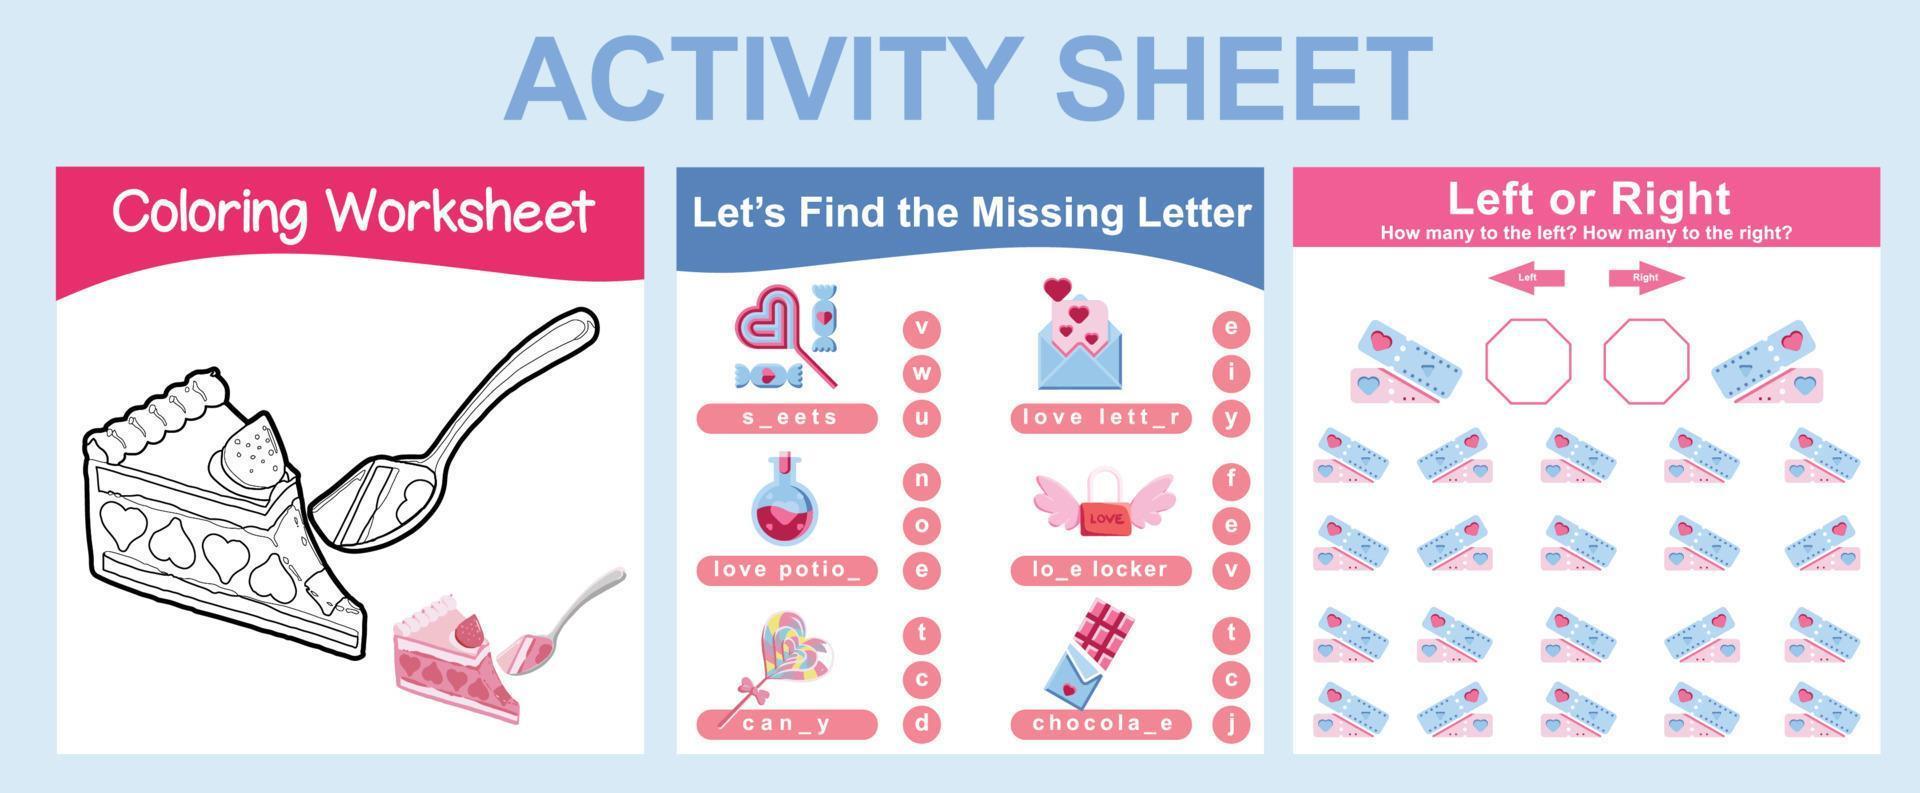 3 in 1 activity sheet for children. Educational printable worksheet. Coloring worksheet, find missing letter, mathematic counting left or right. Vector file.